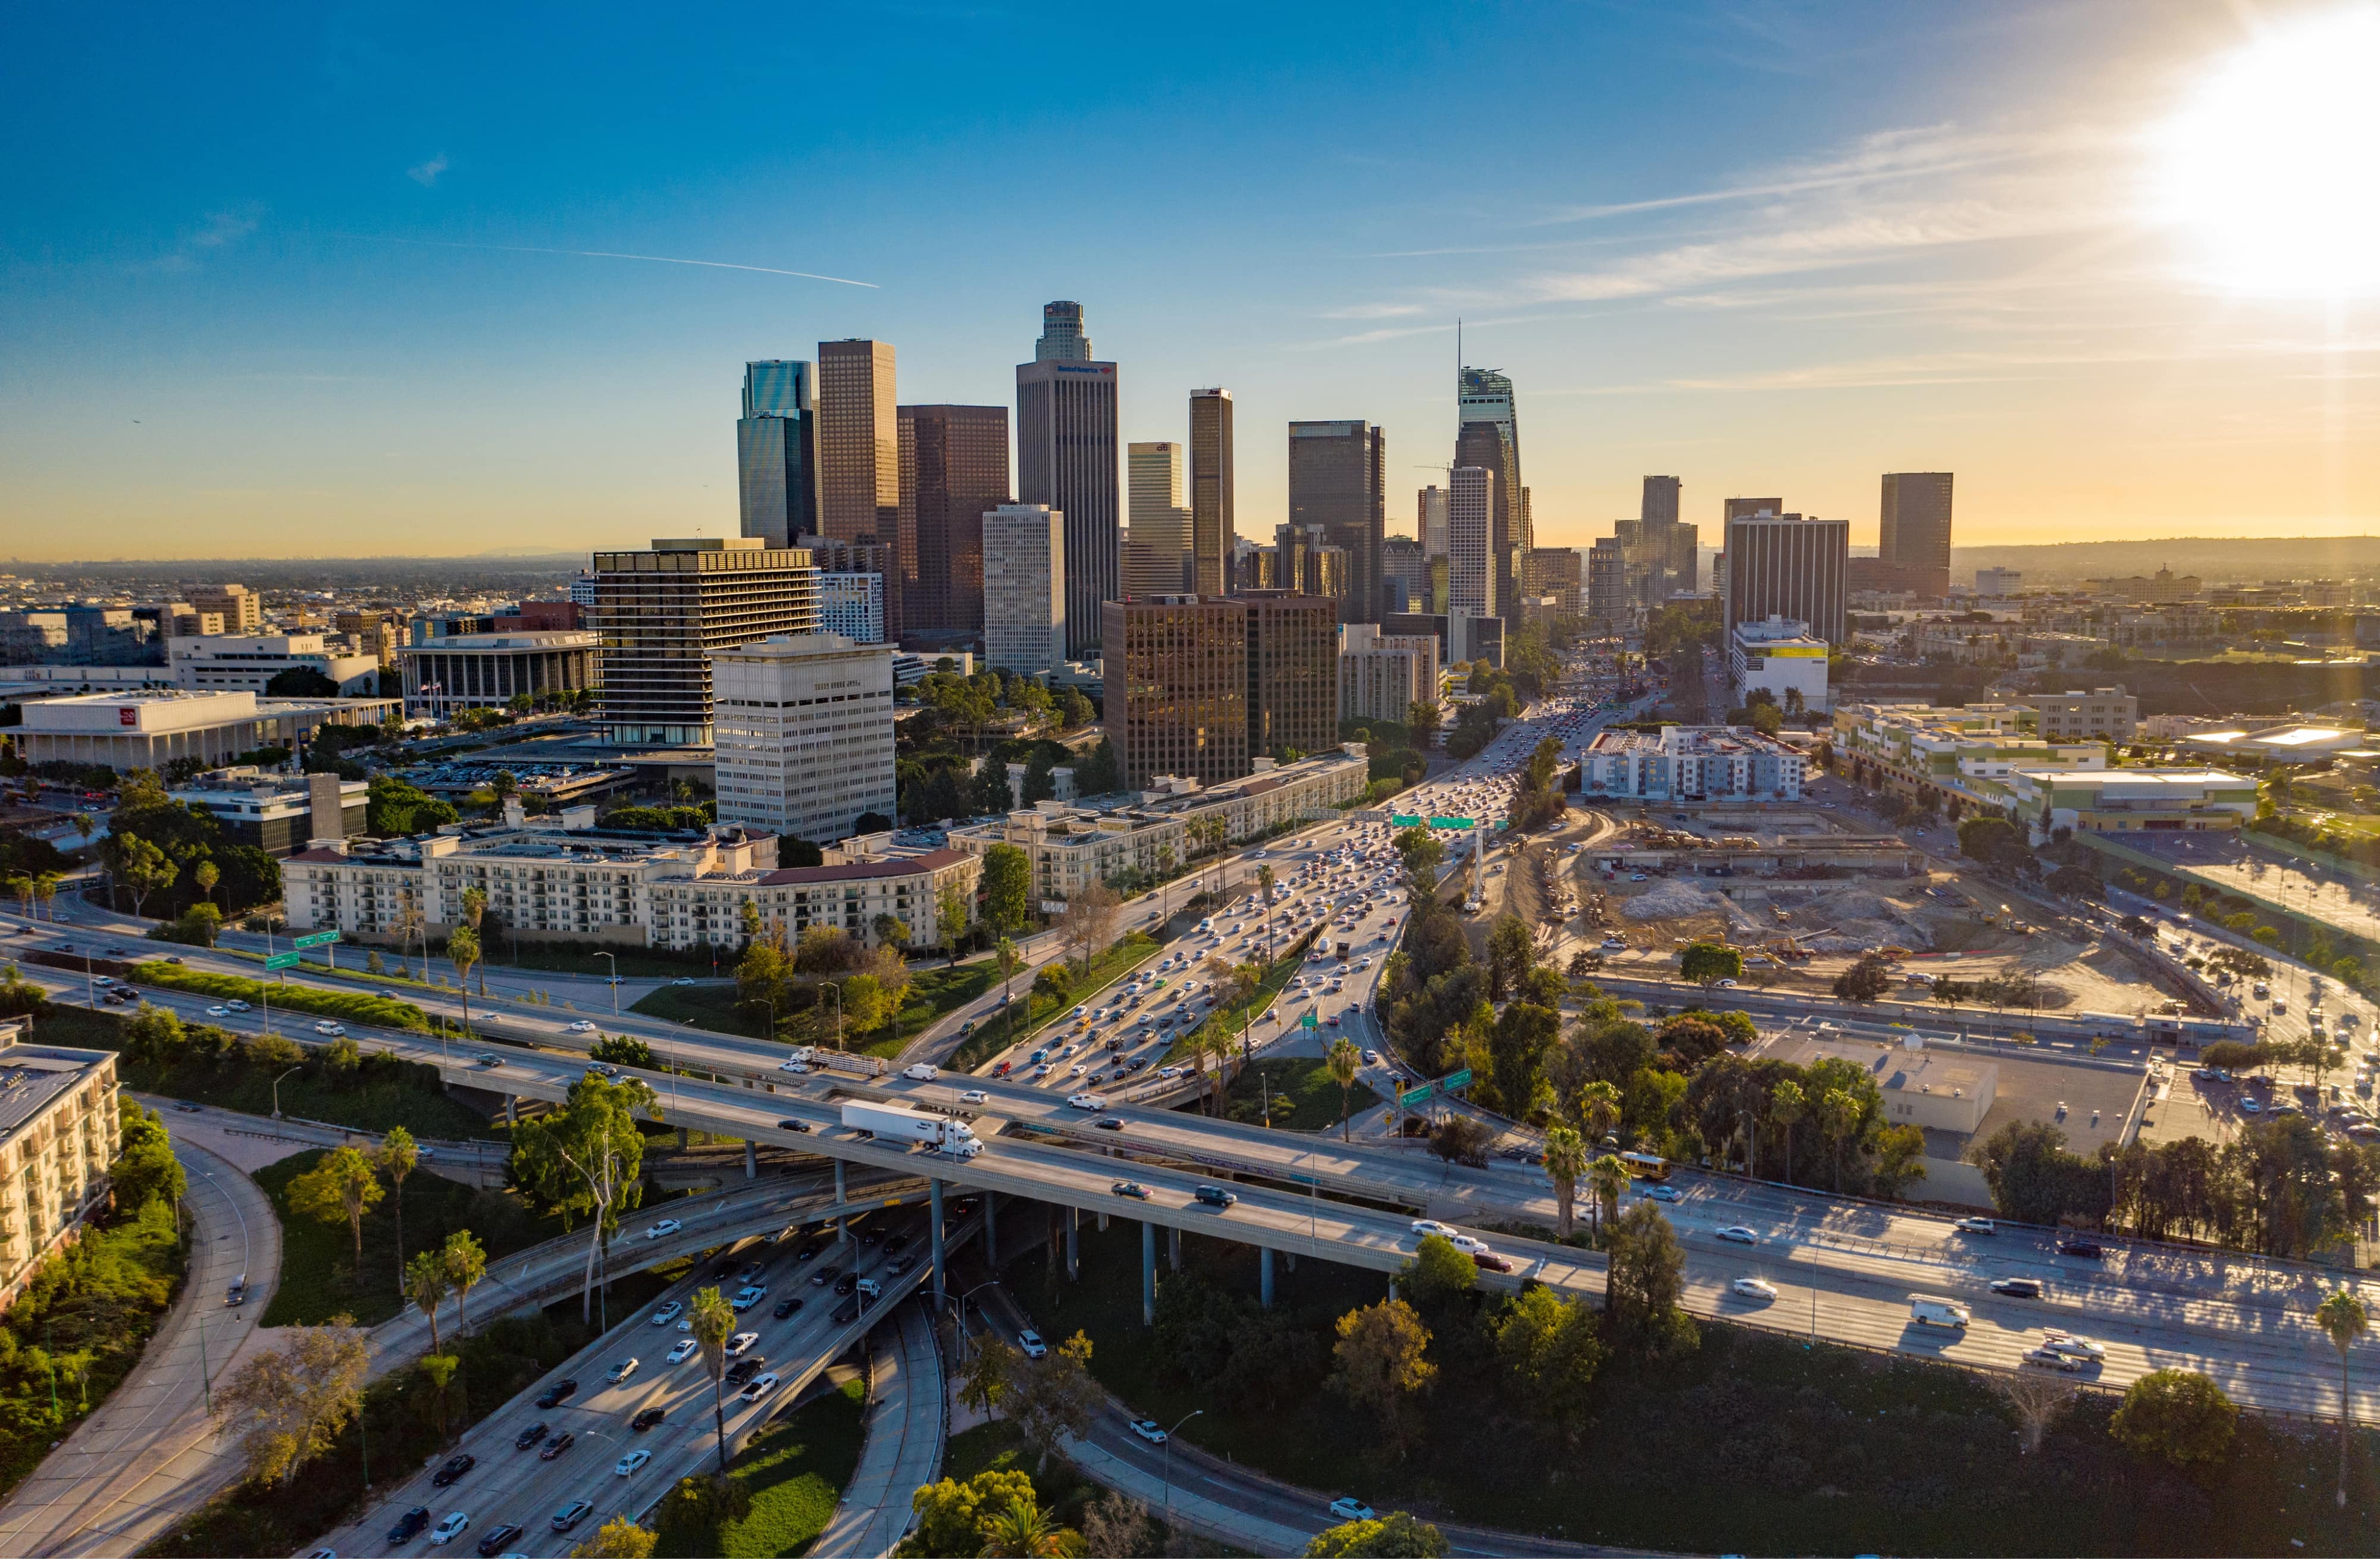 Drone view of downtown Los Angeles or LA skyline with skyscrapers and freeway traffic below